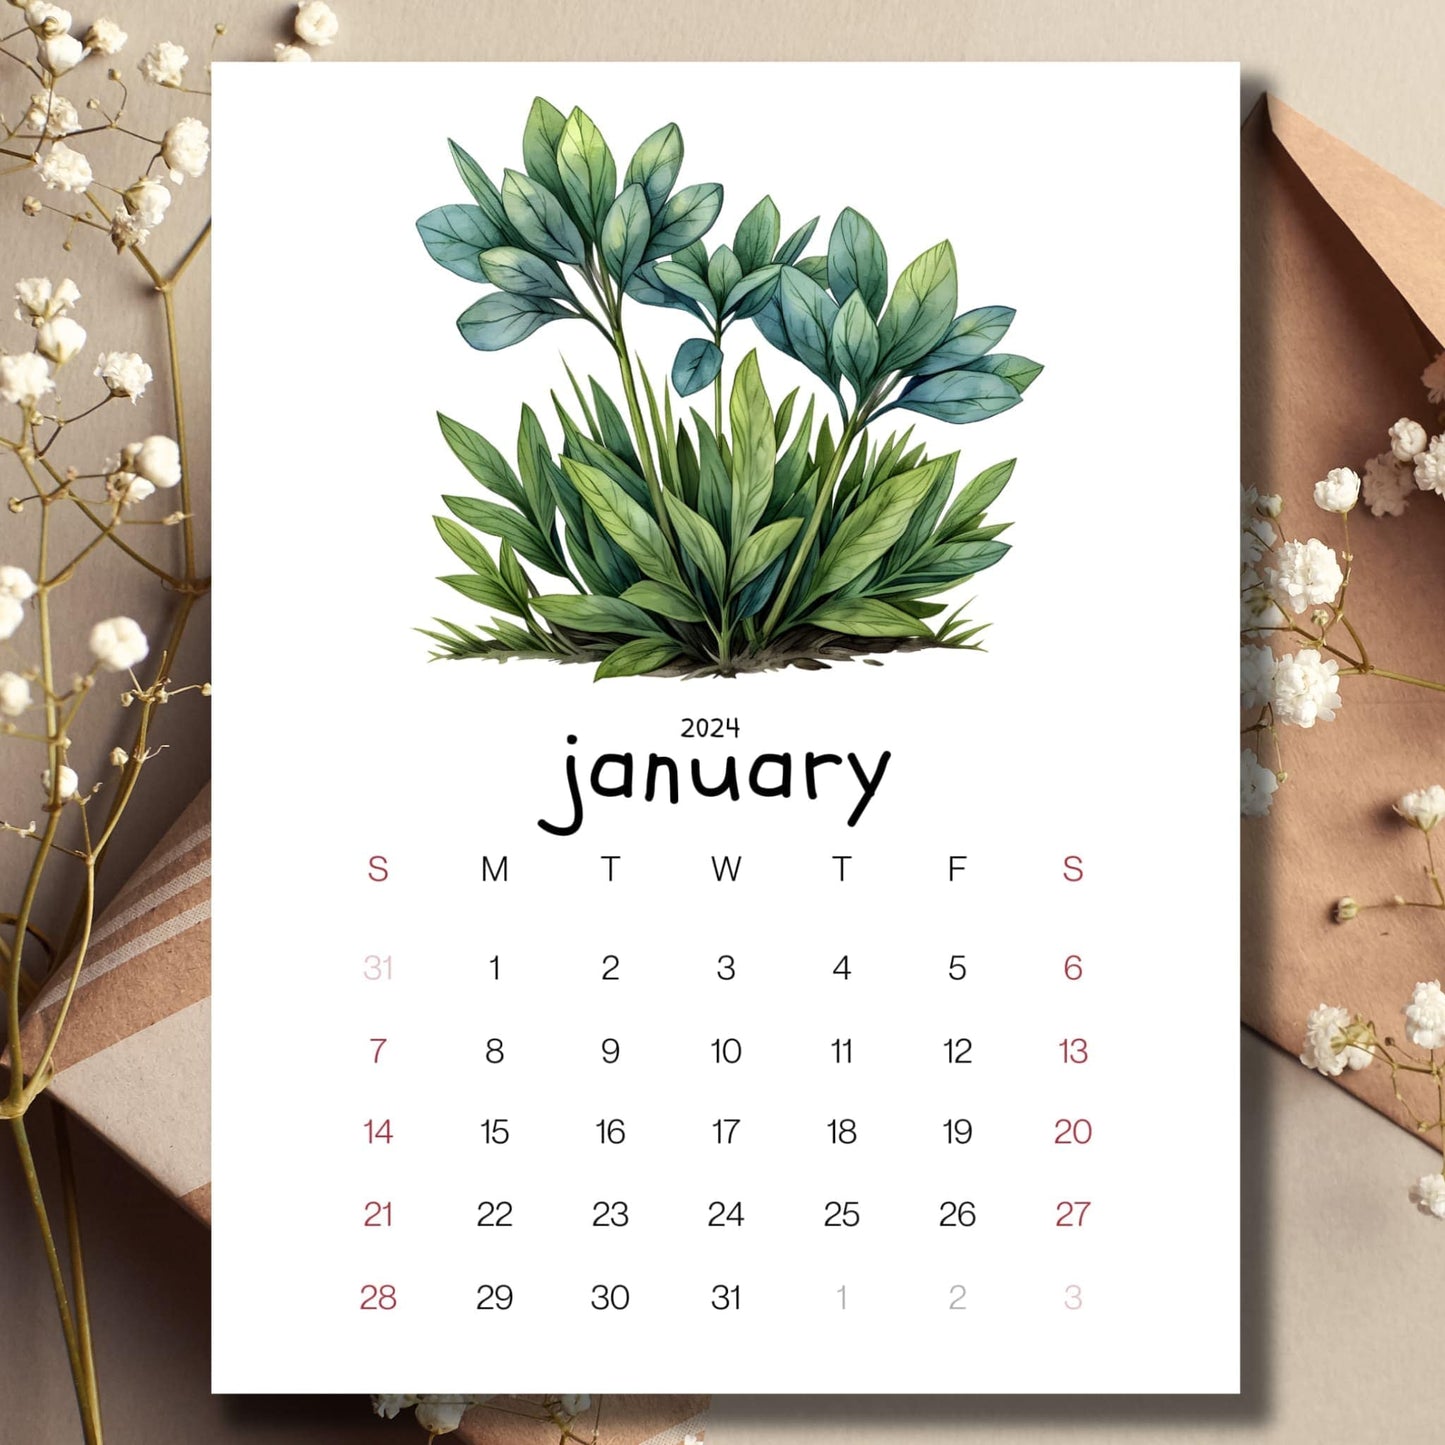 Alpine Plant January 2024 full year calendar displayed on a table with an envelope and delicate white flowers.